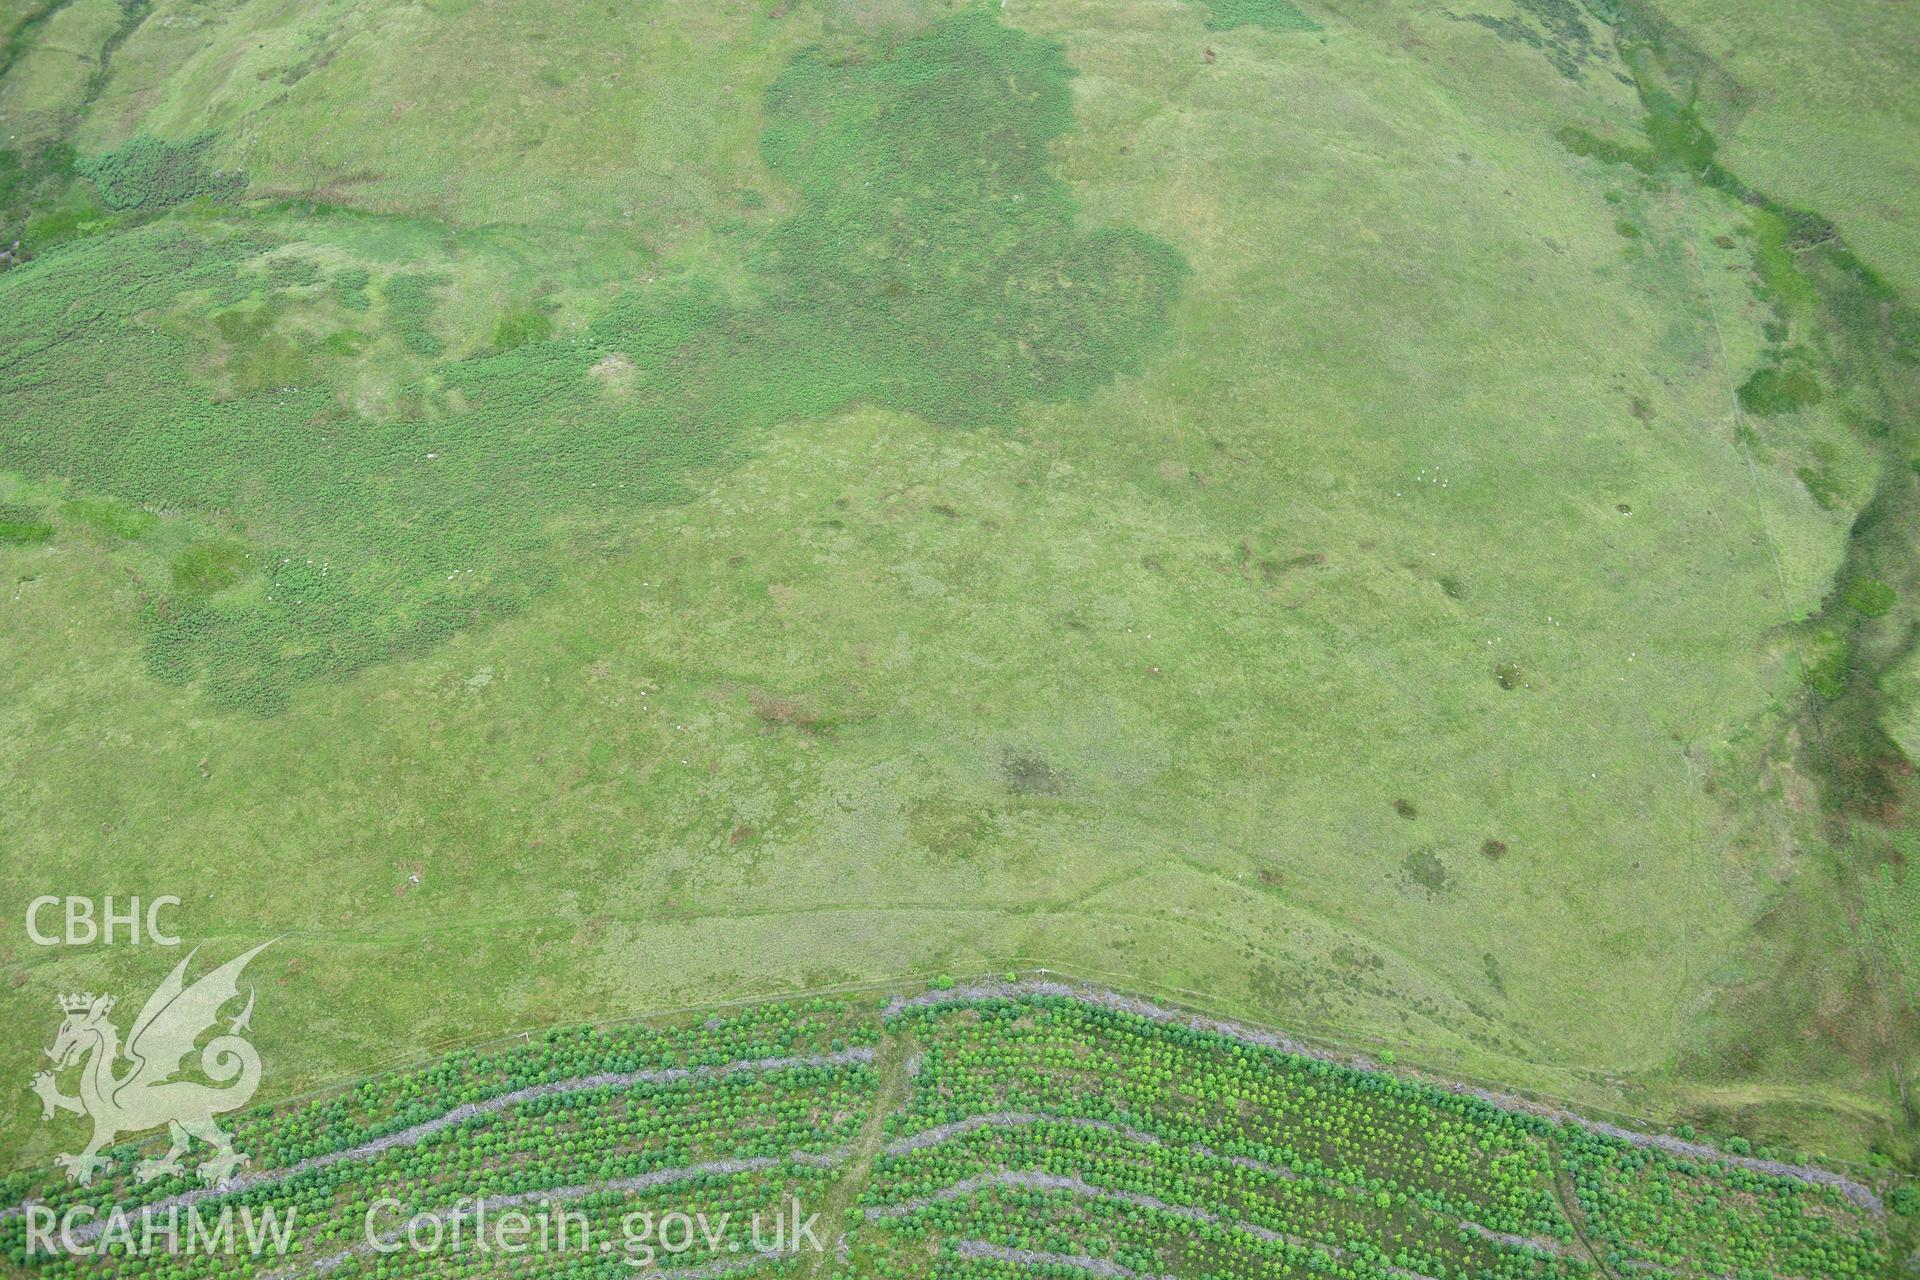 RCAHMW colour oblique photograph of Bwlch Sych, Cairn I. Taken by Toby Driver on 27/07/2012.